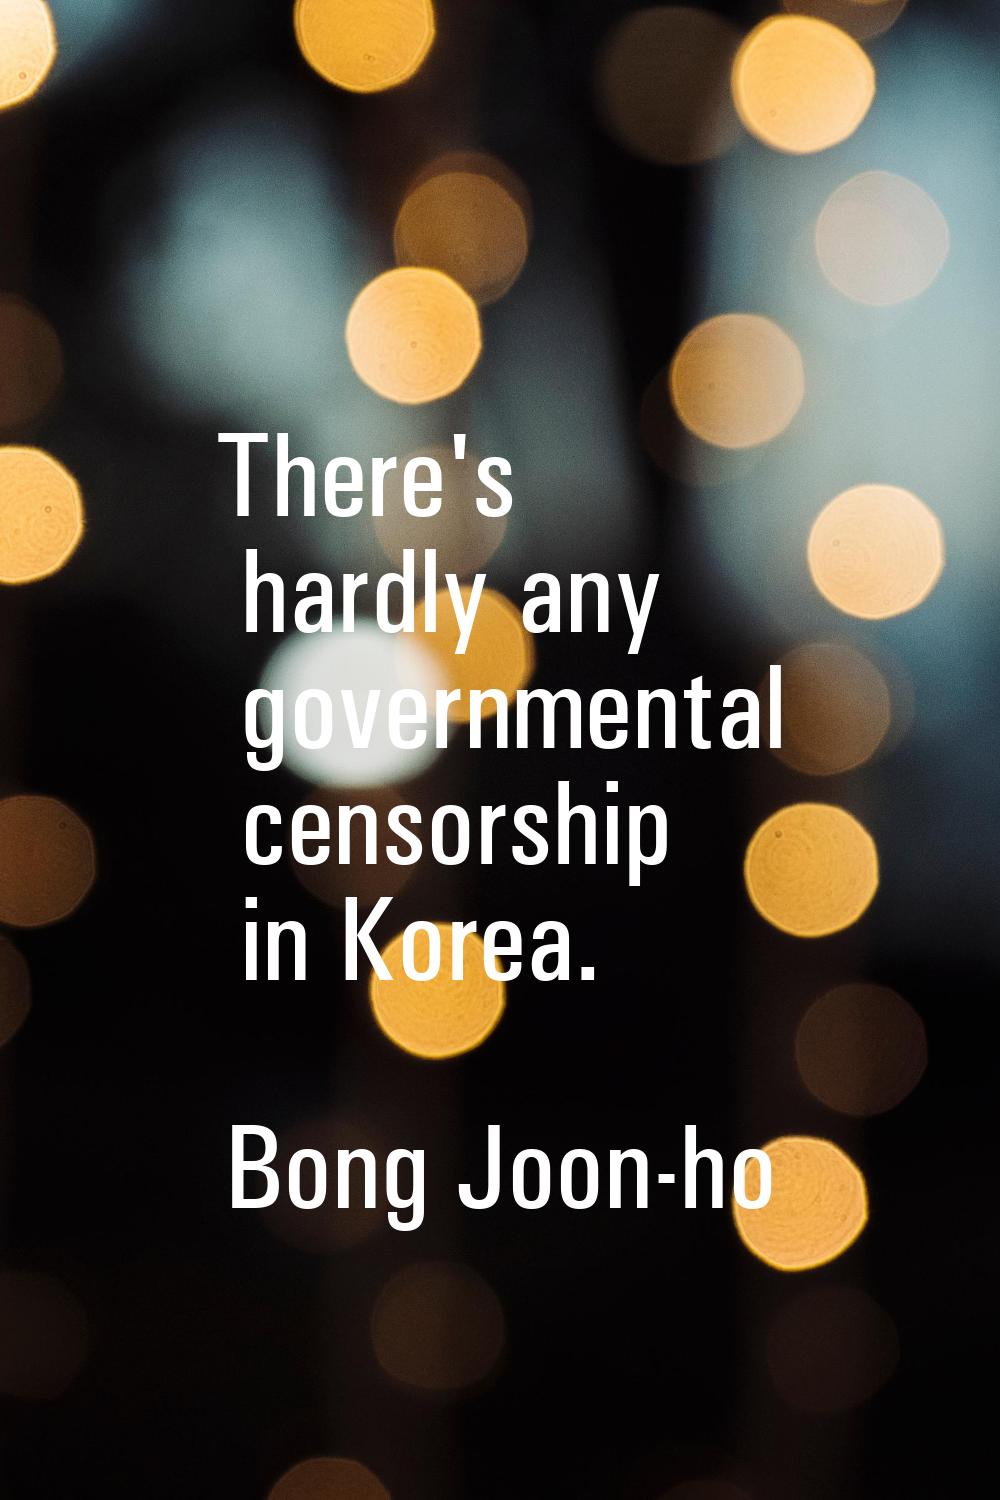 There's hardly any governmental censorship in Korea.